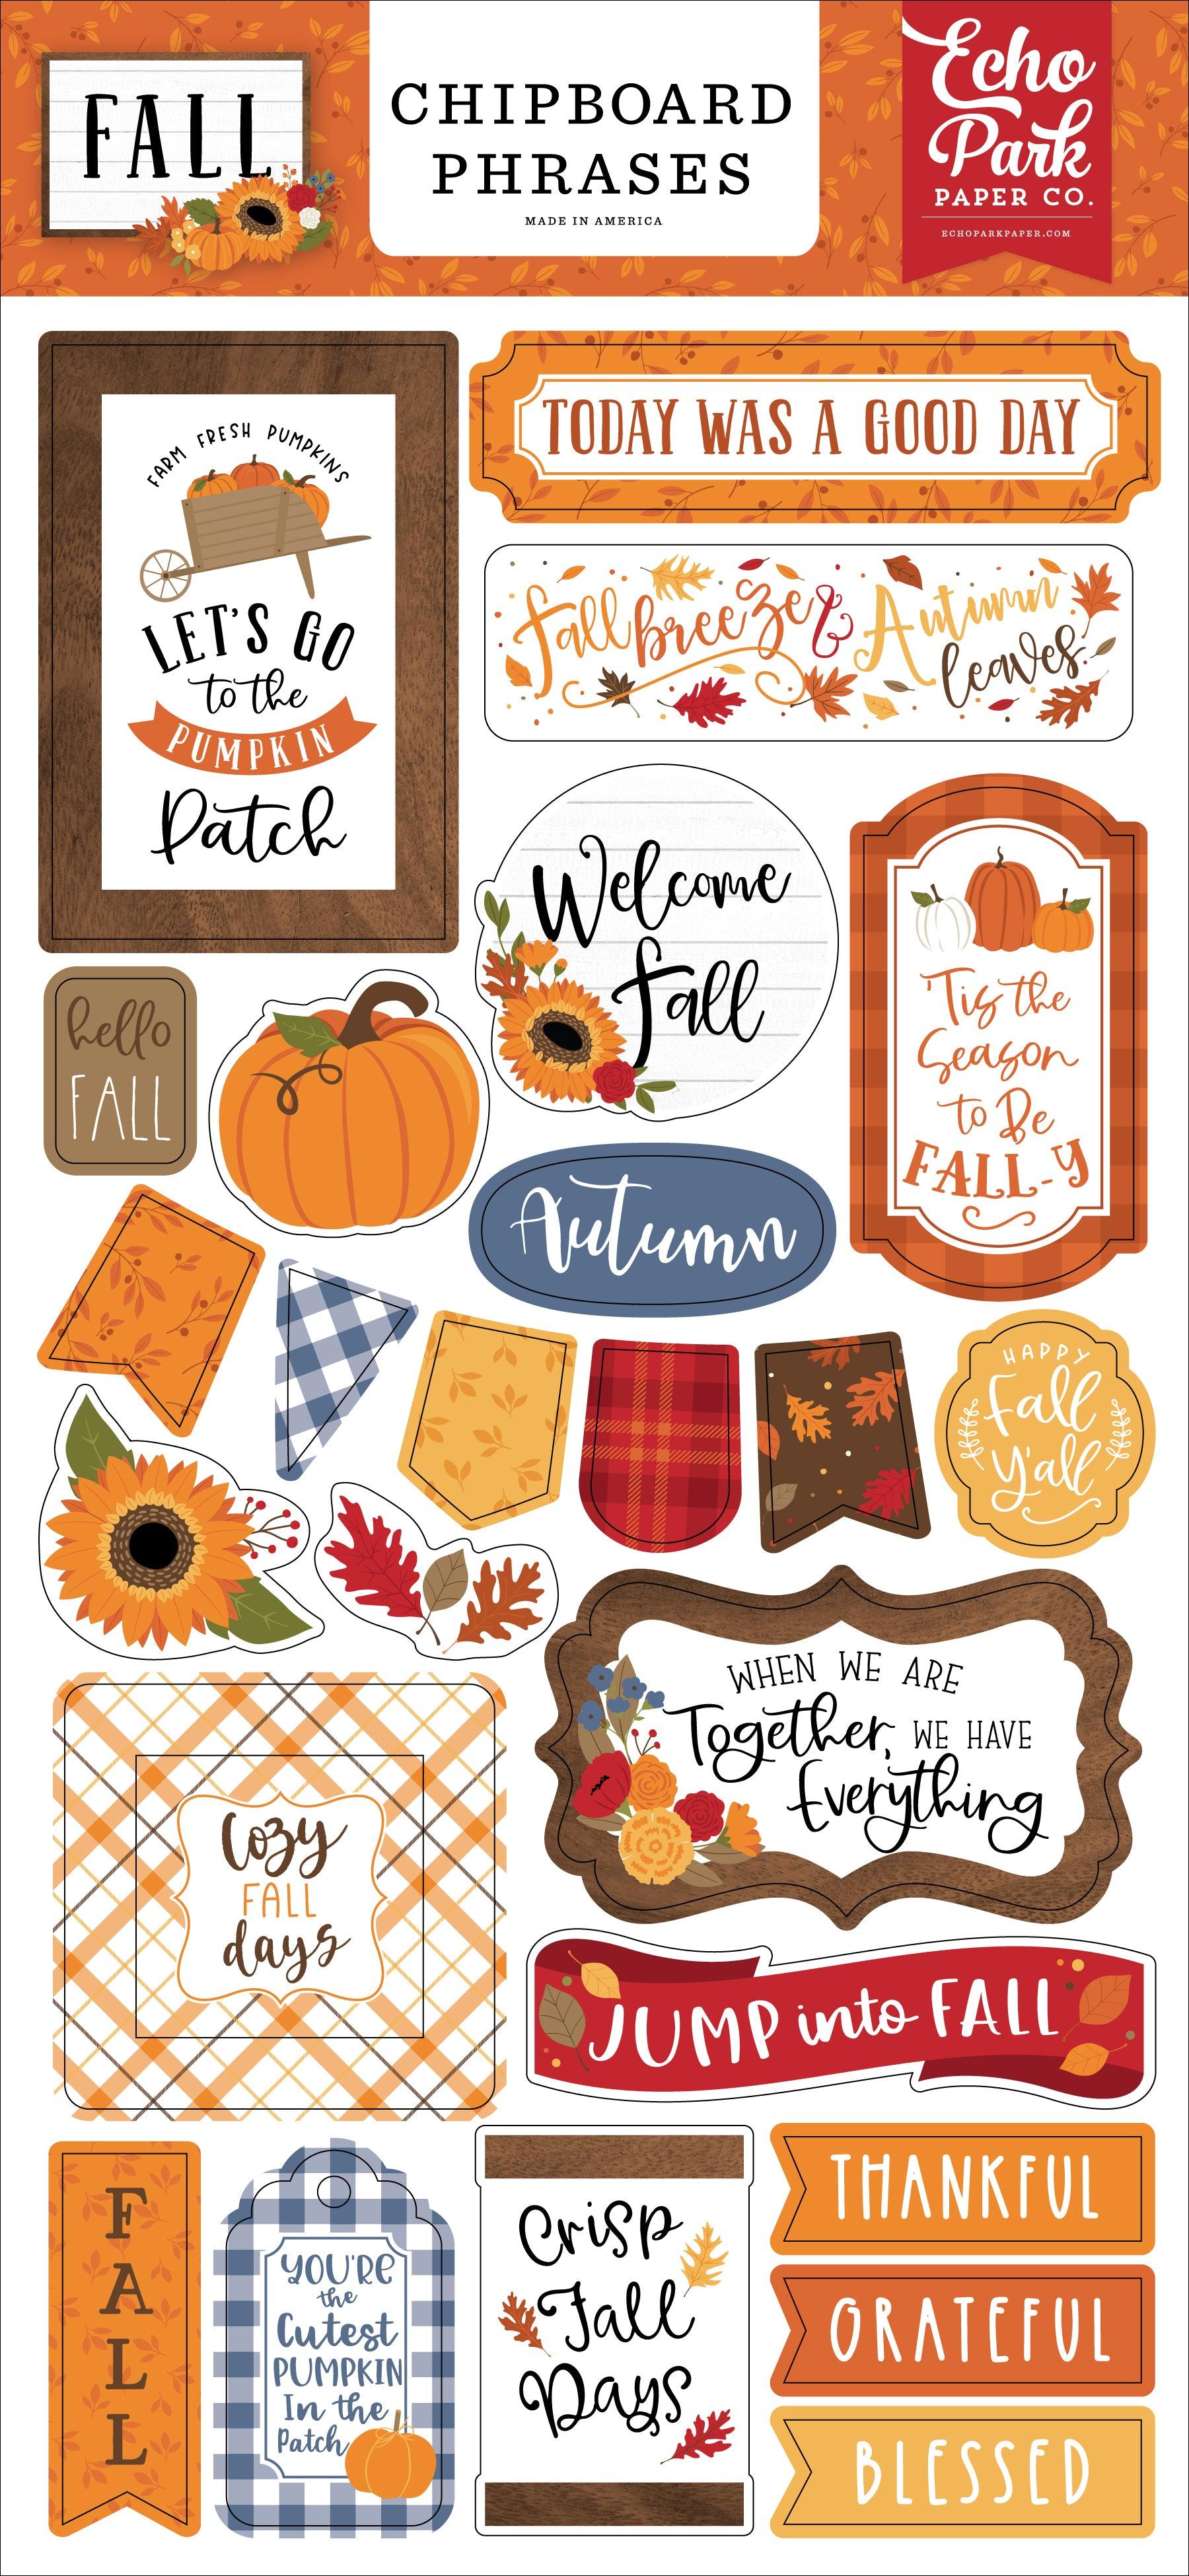 Fall Collection 6 x 12 Scrapbook Chipboard Phrases by Echo Park Paper - Scrapbook Supply Companies